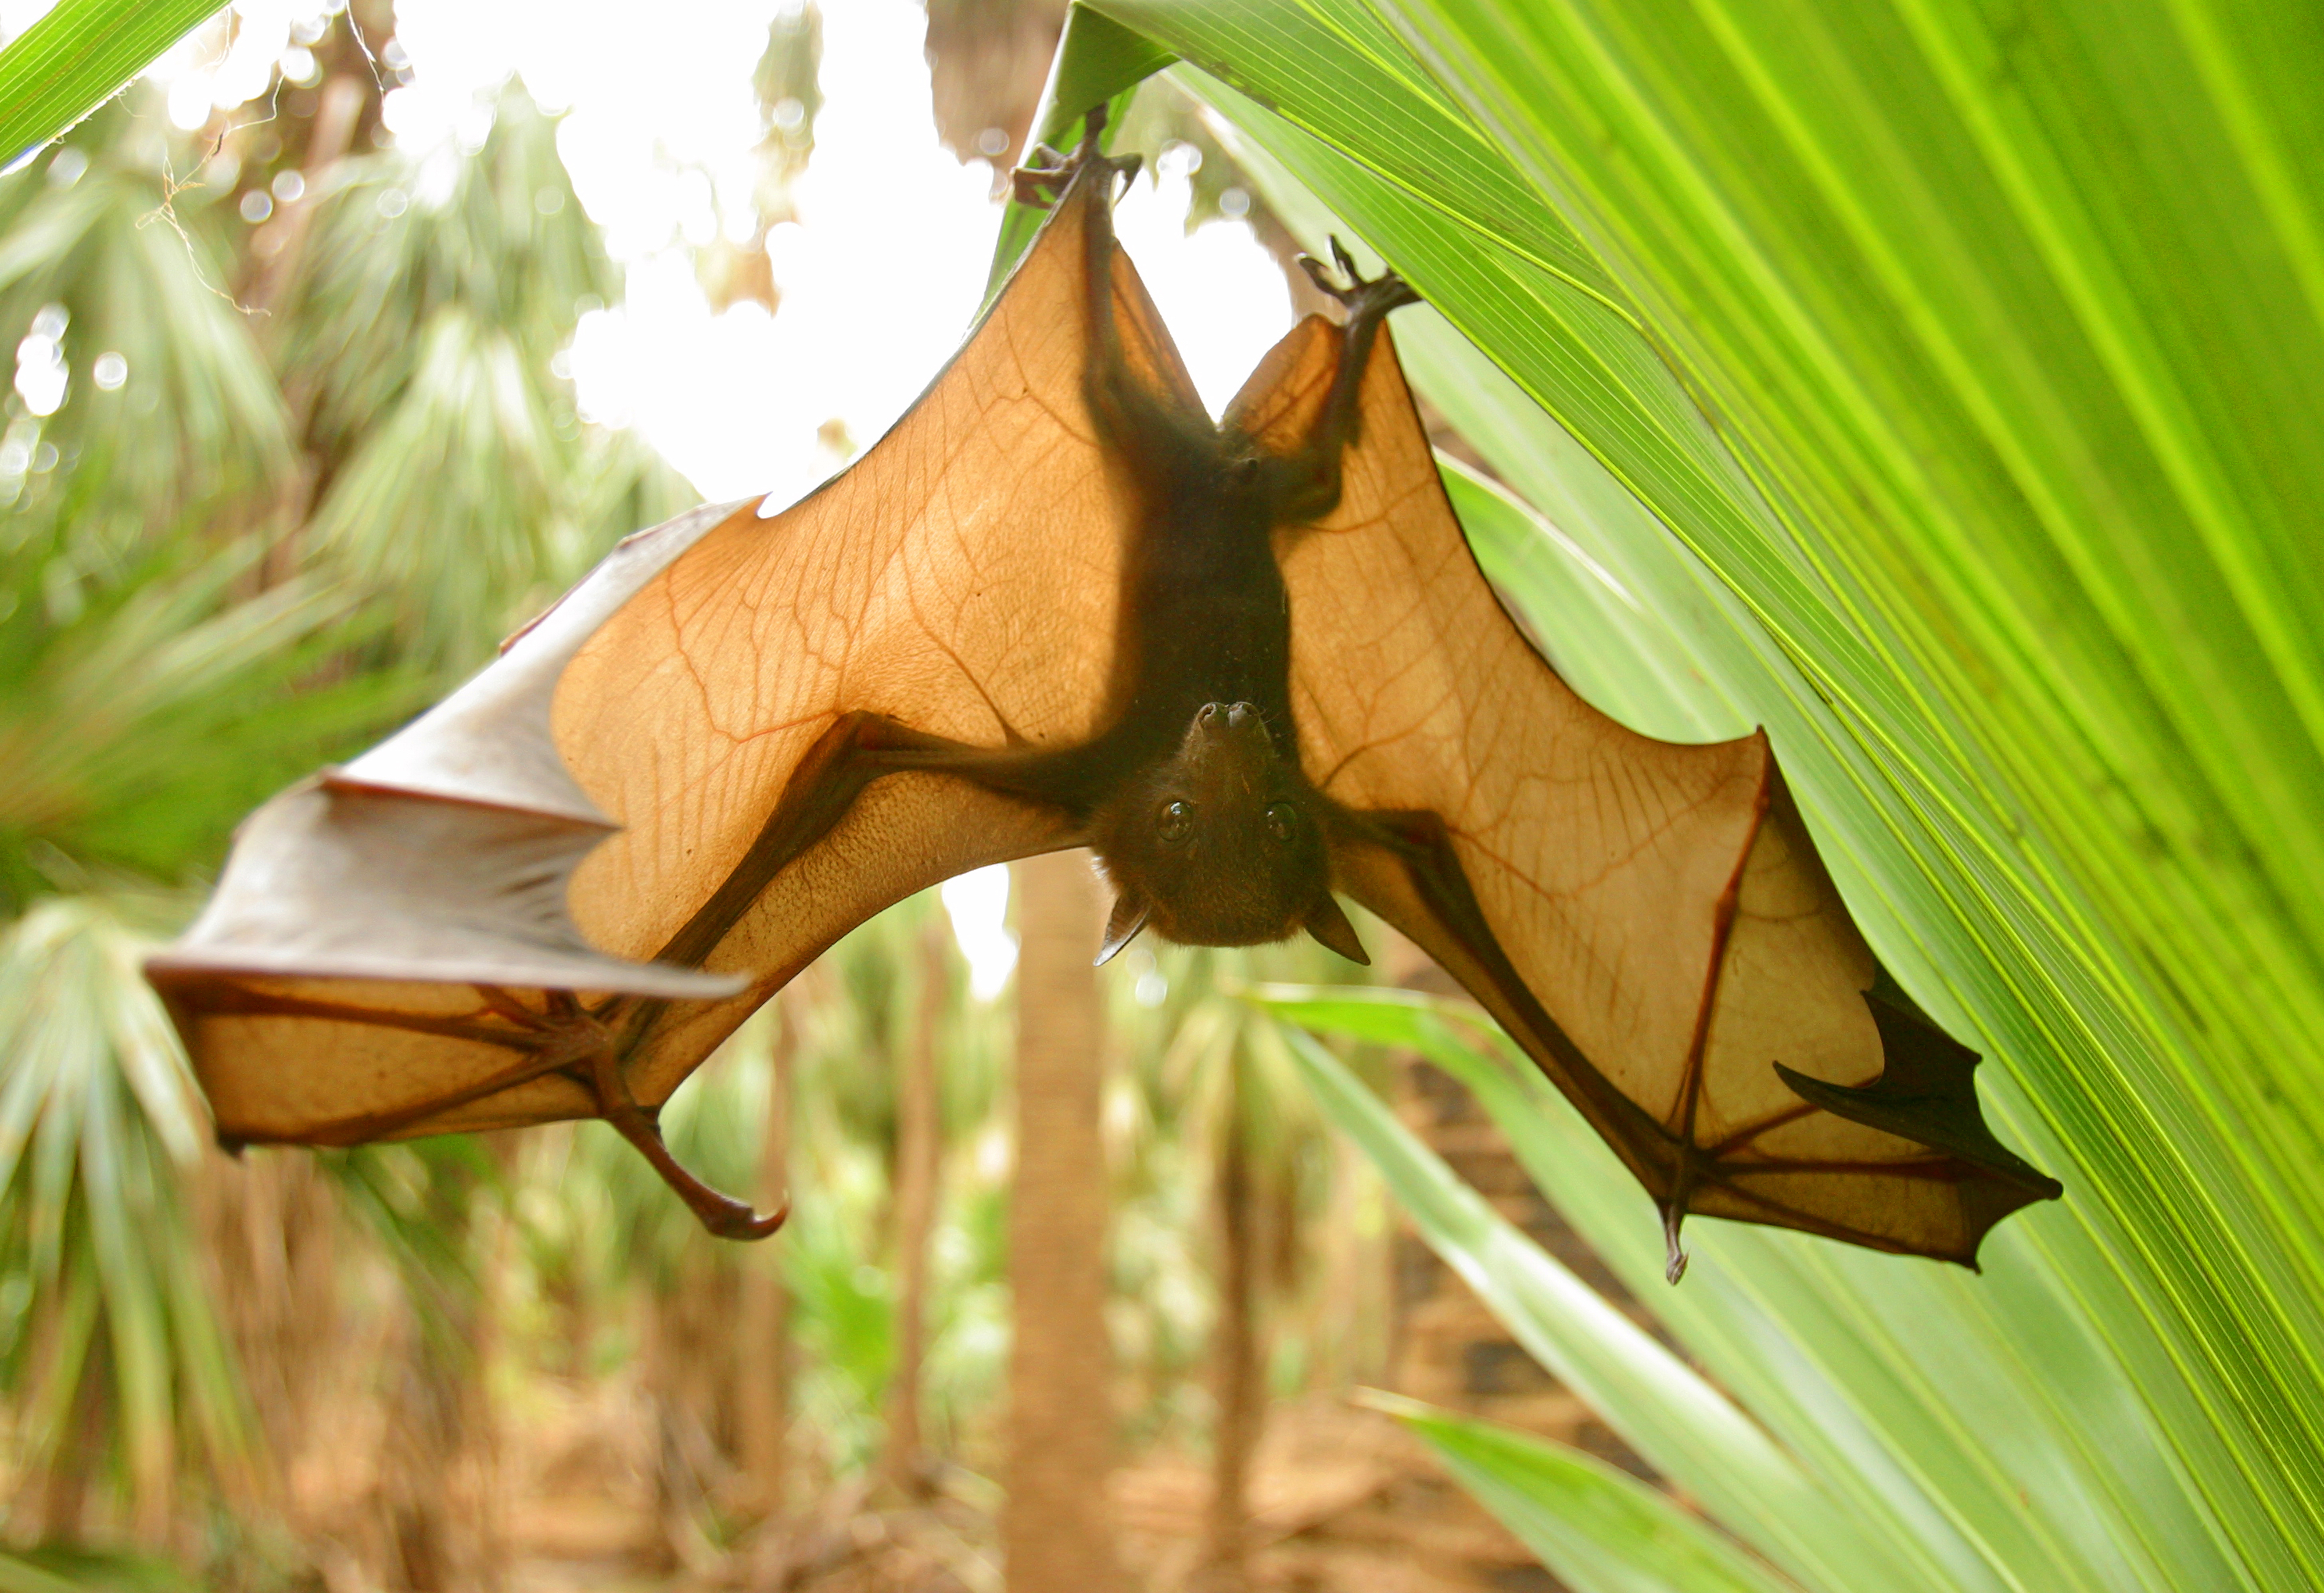 A bat hanging upside down off a green plant outdoors